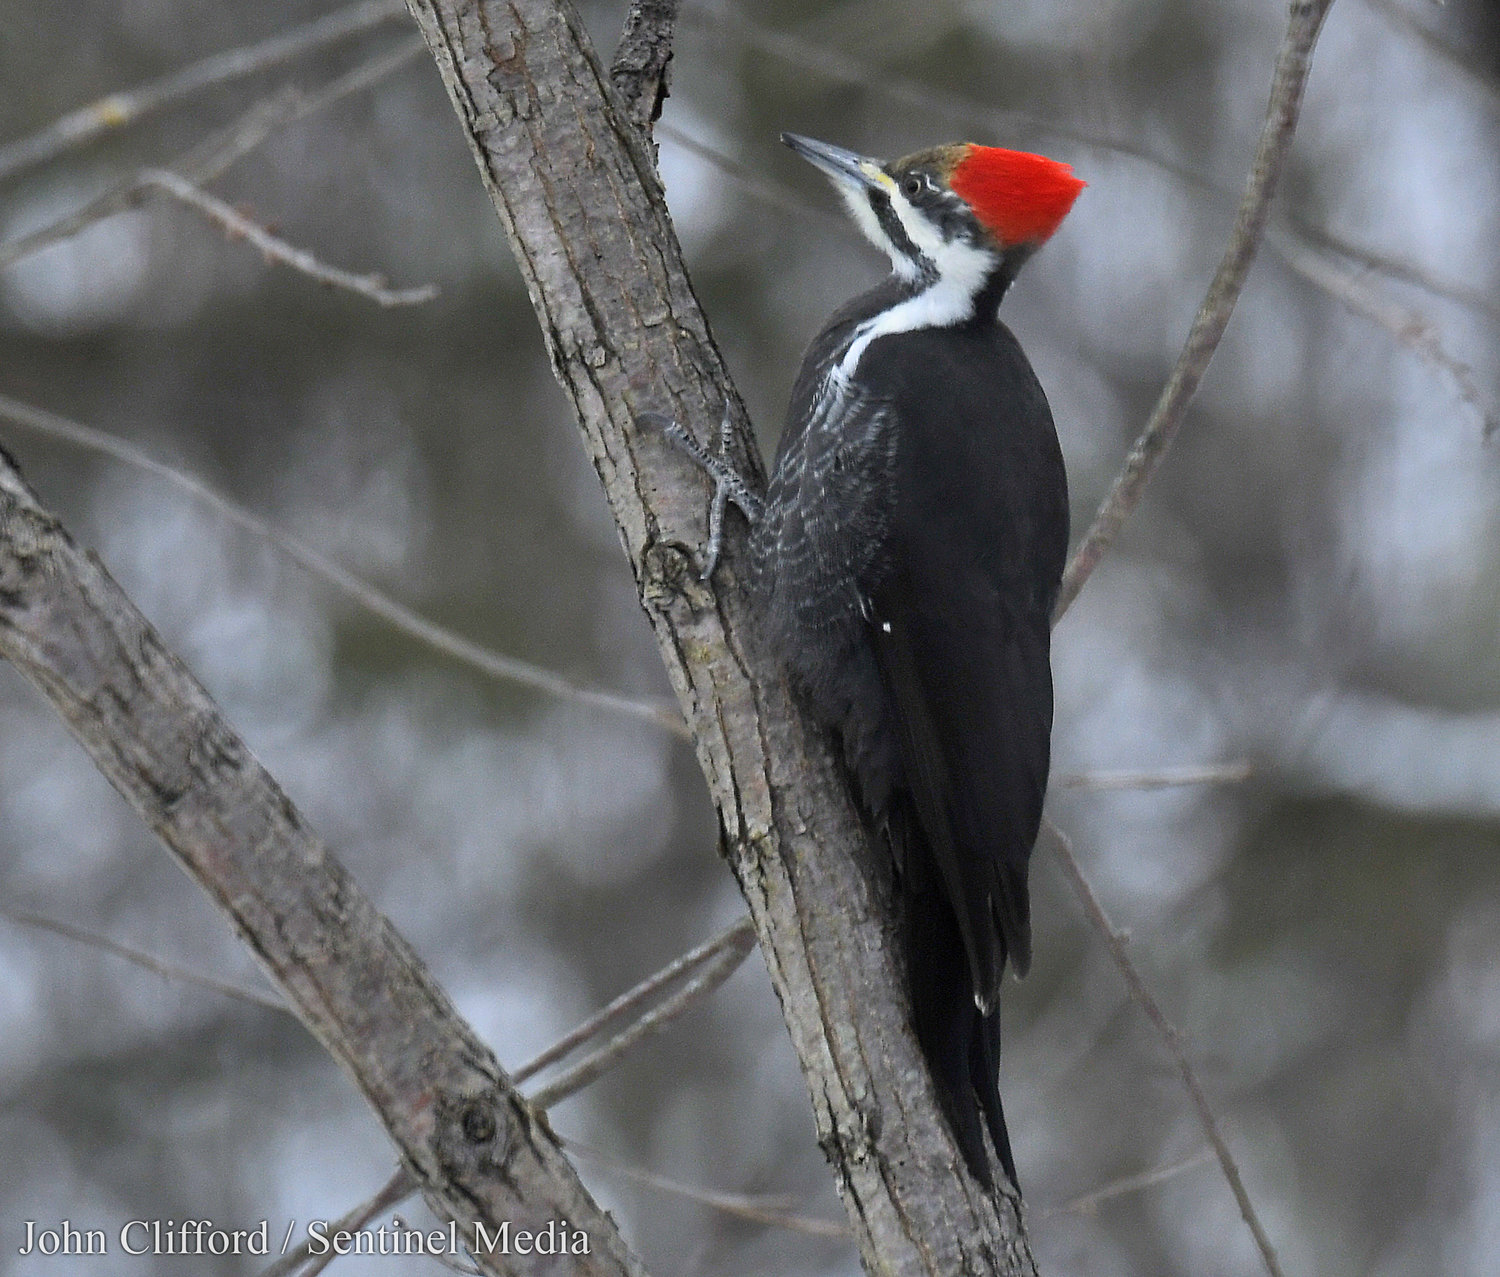 A Pileated Woodpecker on a tree branch along Route 46 near the Rome Fish Hatchery Thursday, December 15, 2022.